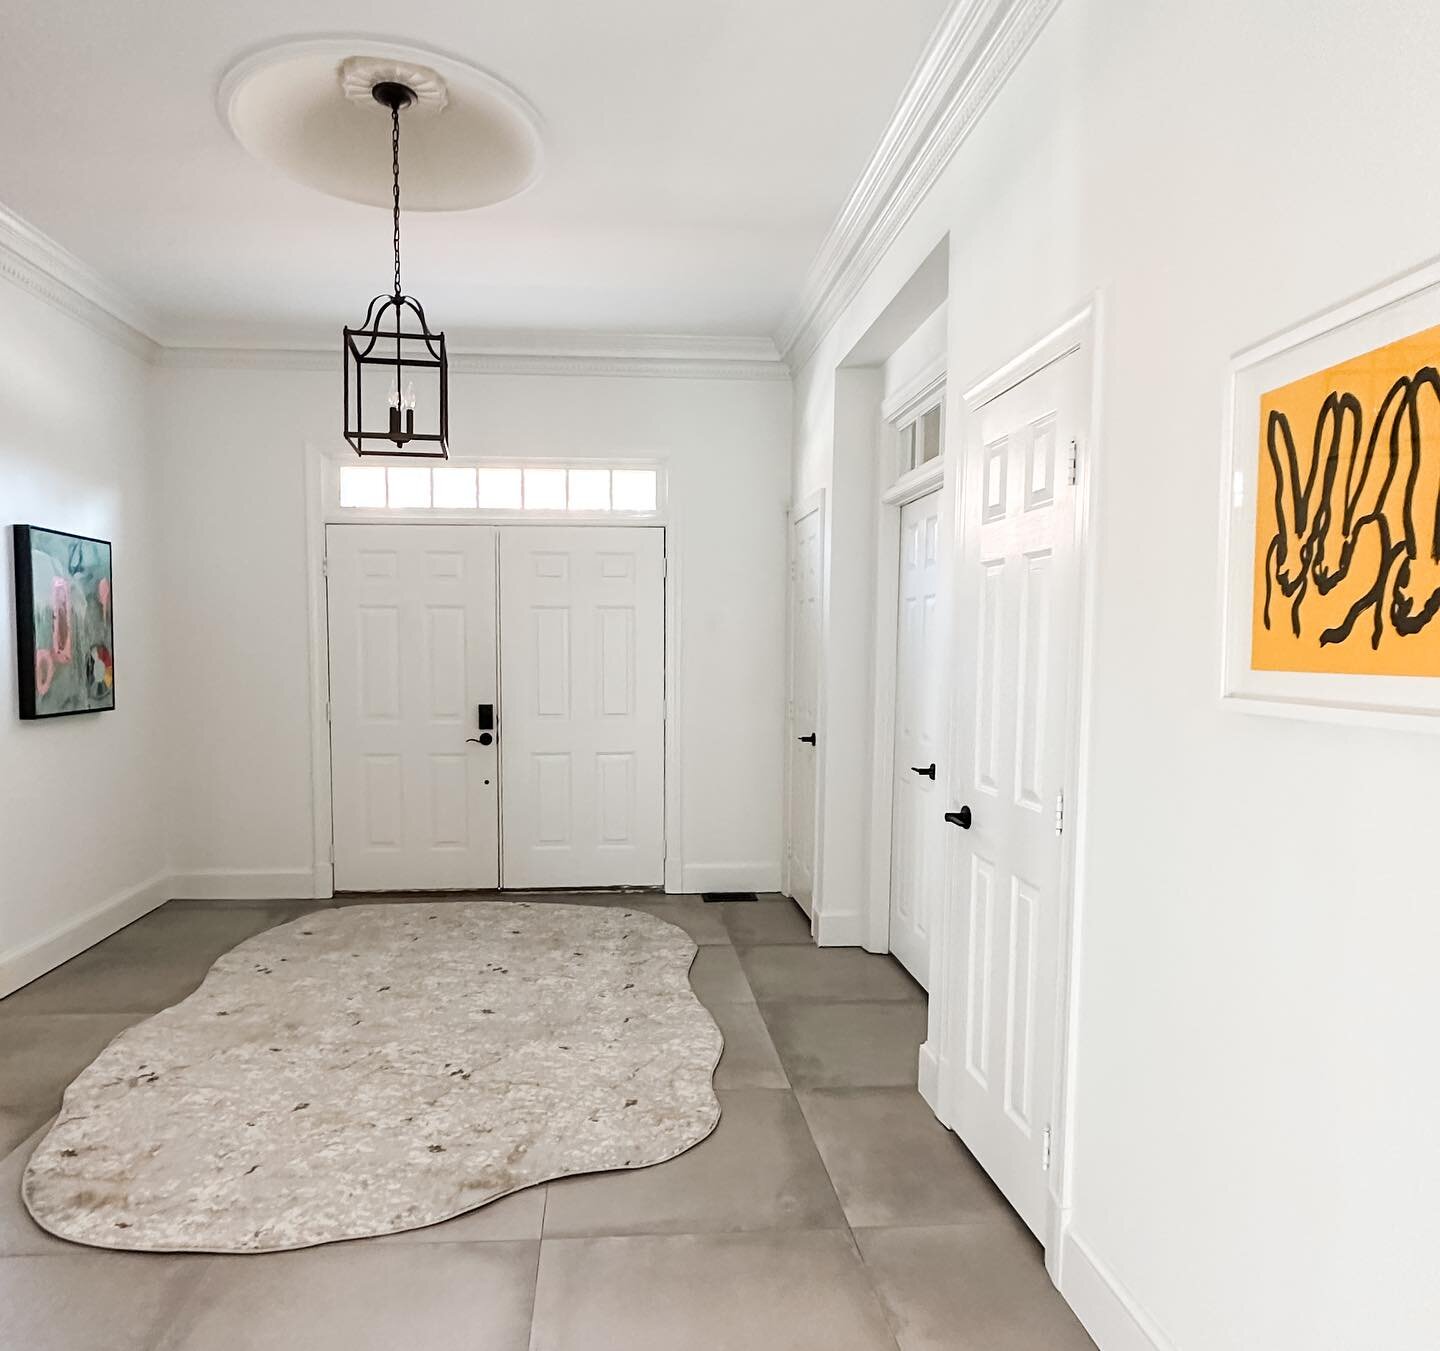 Welcome and enter with a happy heart ::

#darabeitlerinteriors 
#entry 
#home 
#foyer 
#art 
#rug 
#custom 
#warmhome 
#entryway